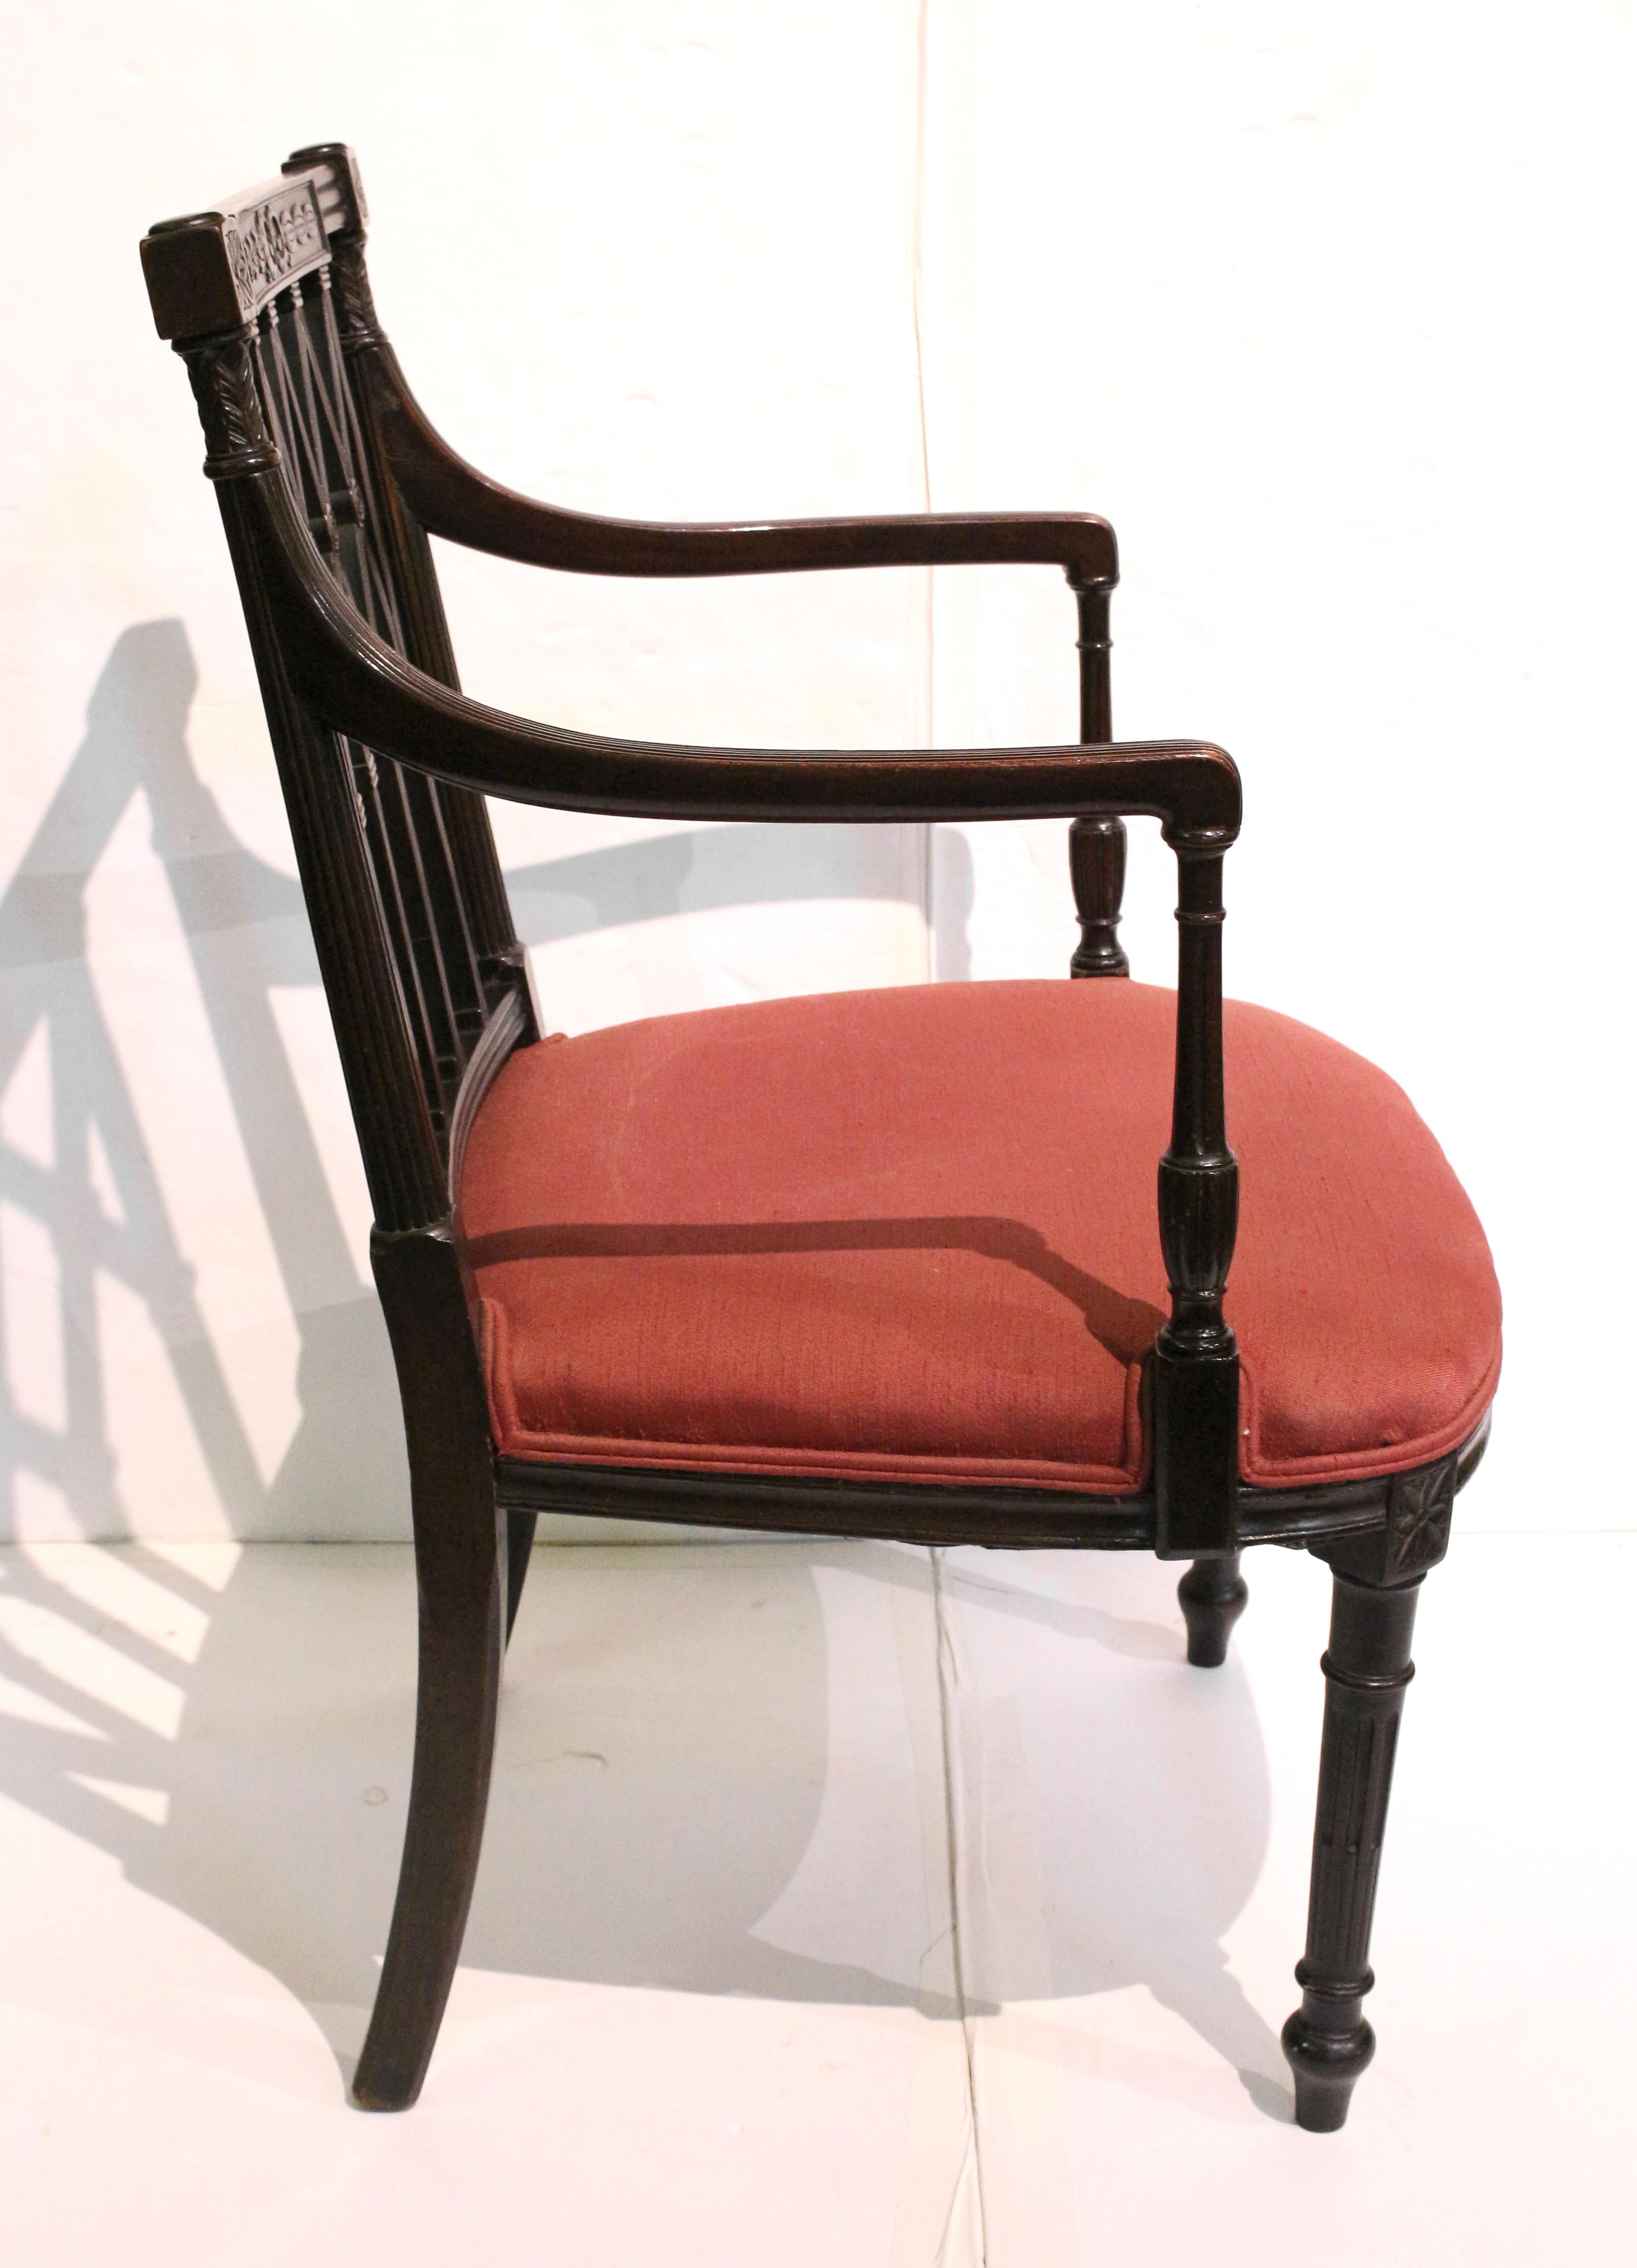 Pair of Mid-19th Century Classical English Arm Chairs 1